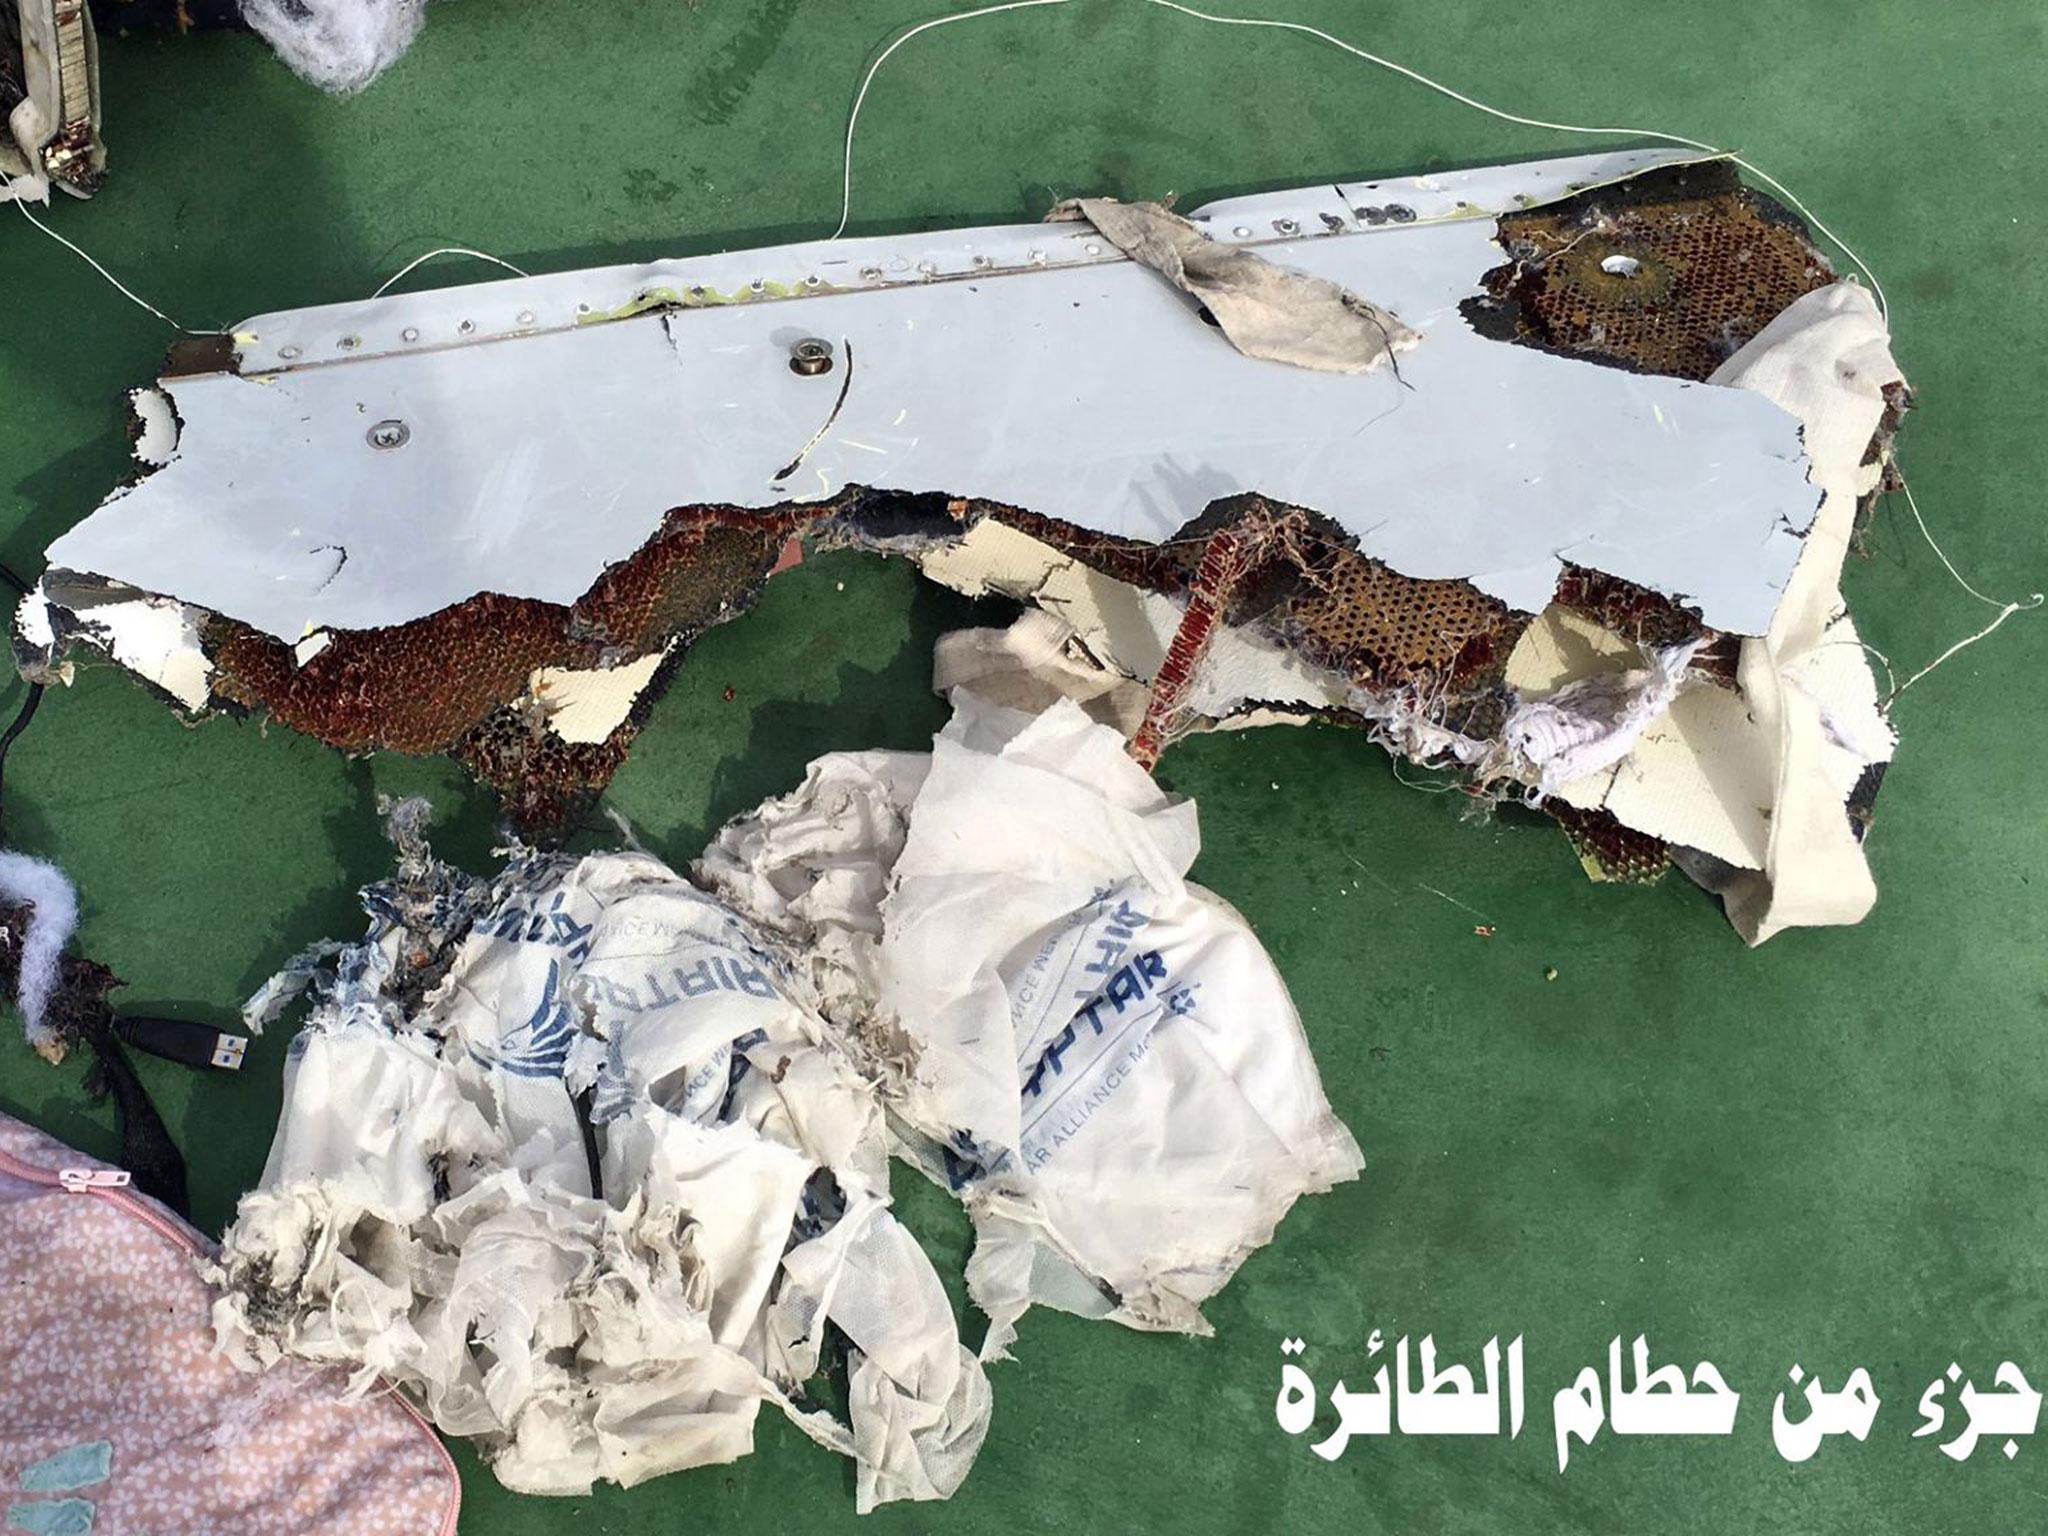 ‘The logical explanation is that an explosion brought it down,’ believes a forensics official. But no terrorist group has claimed responsibility for the disaster on EgyptAir Flight 804